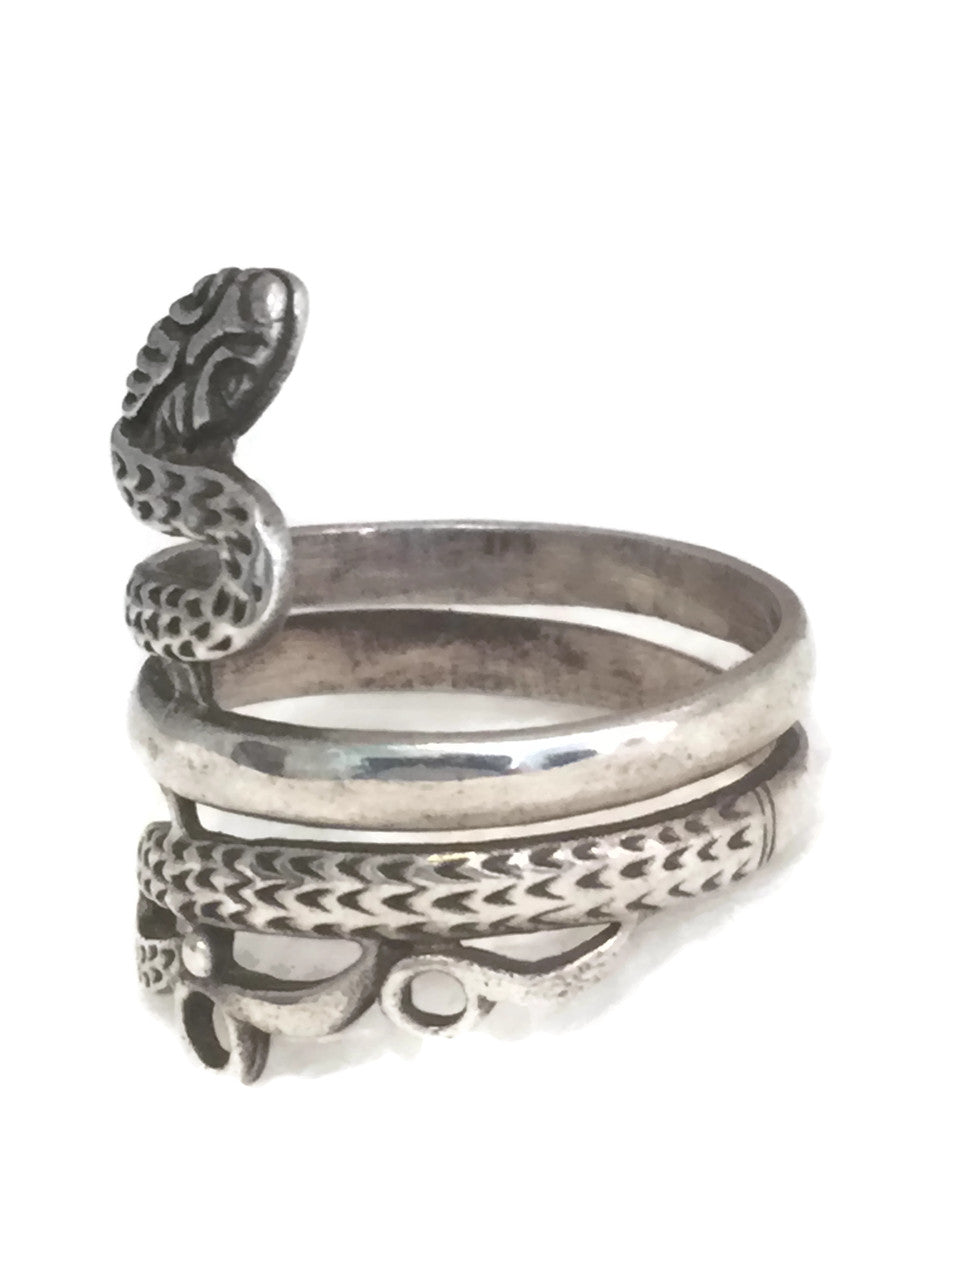 Snake Ring Sterling Silver Band Serpent Size 7.25